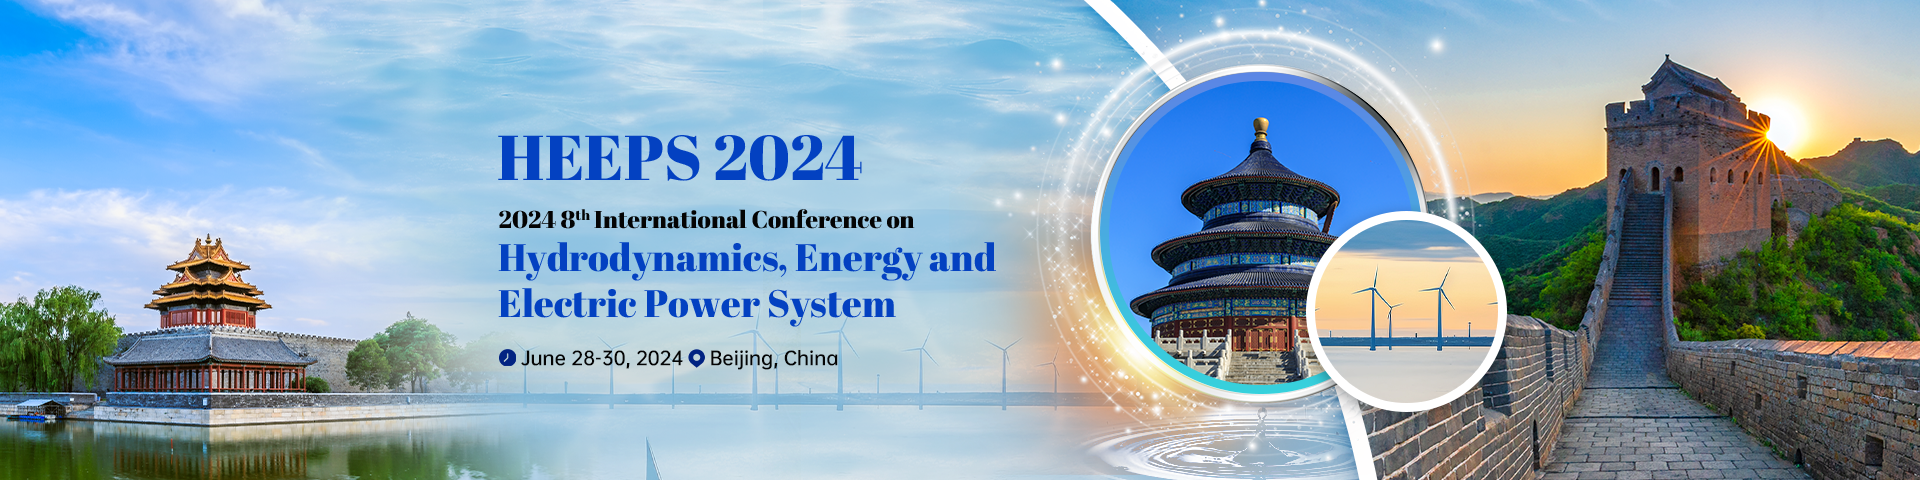 2024 8th International Conference on Hydrodynamics, Energy and Electric Power System, Beijing, China